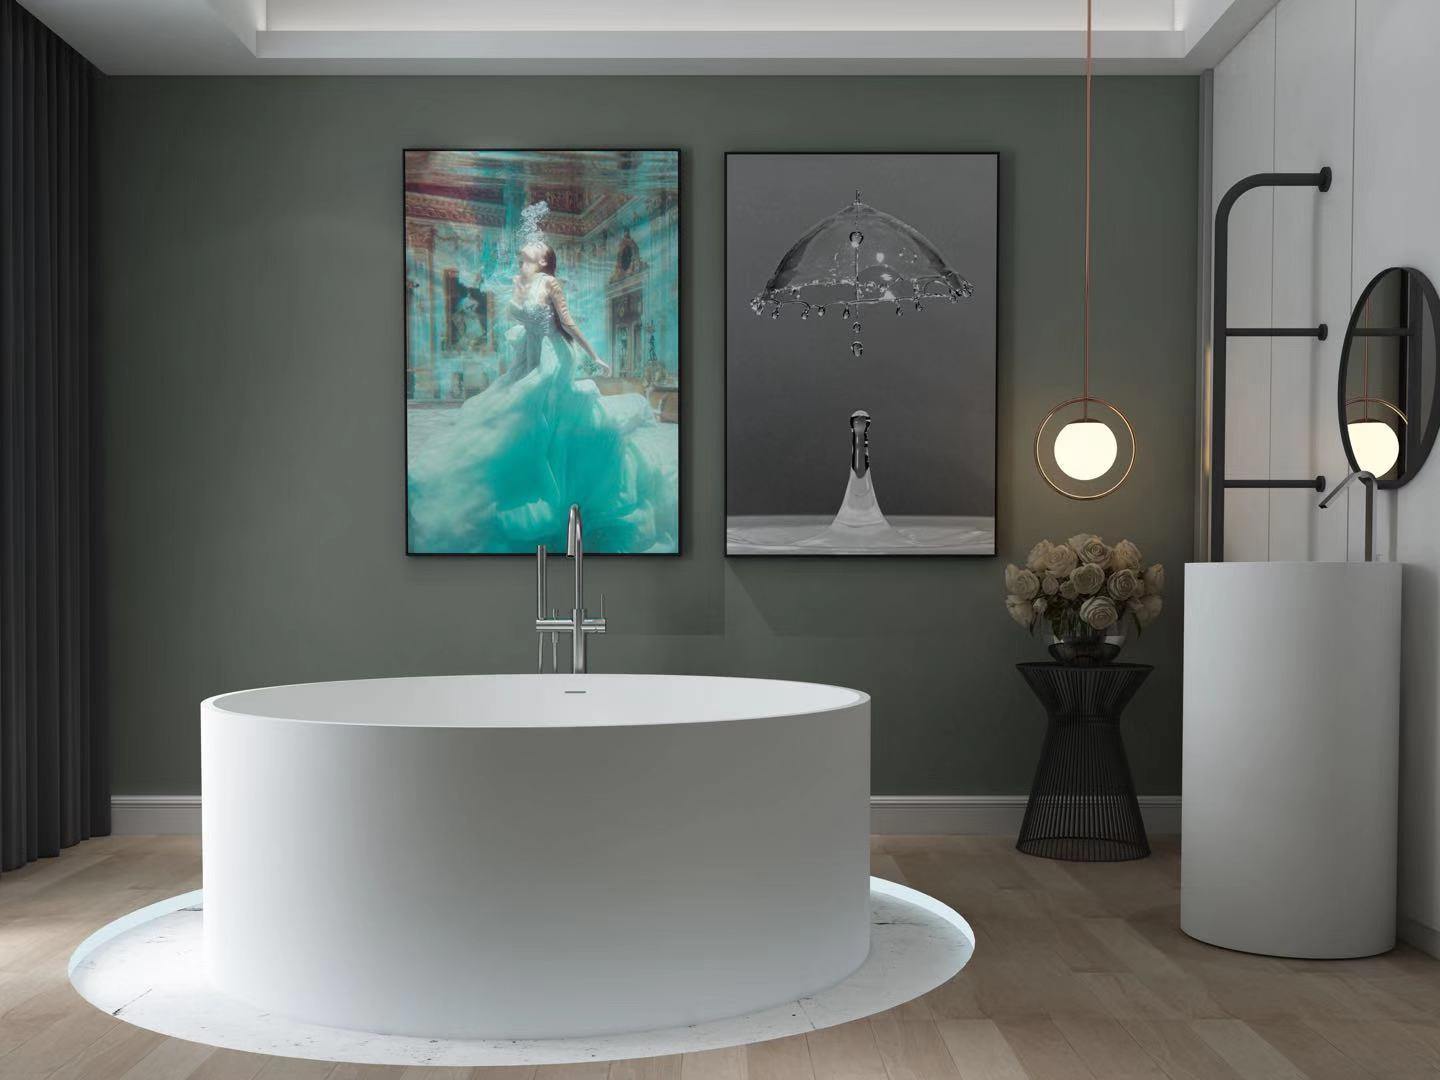 freestanding bathtub ps-8818(Pure Acrylic Solid Surface)